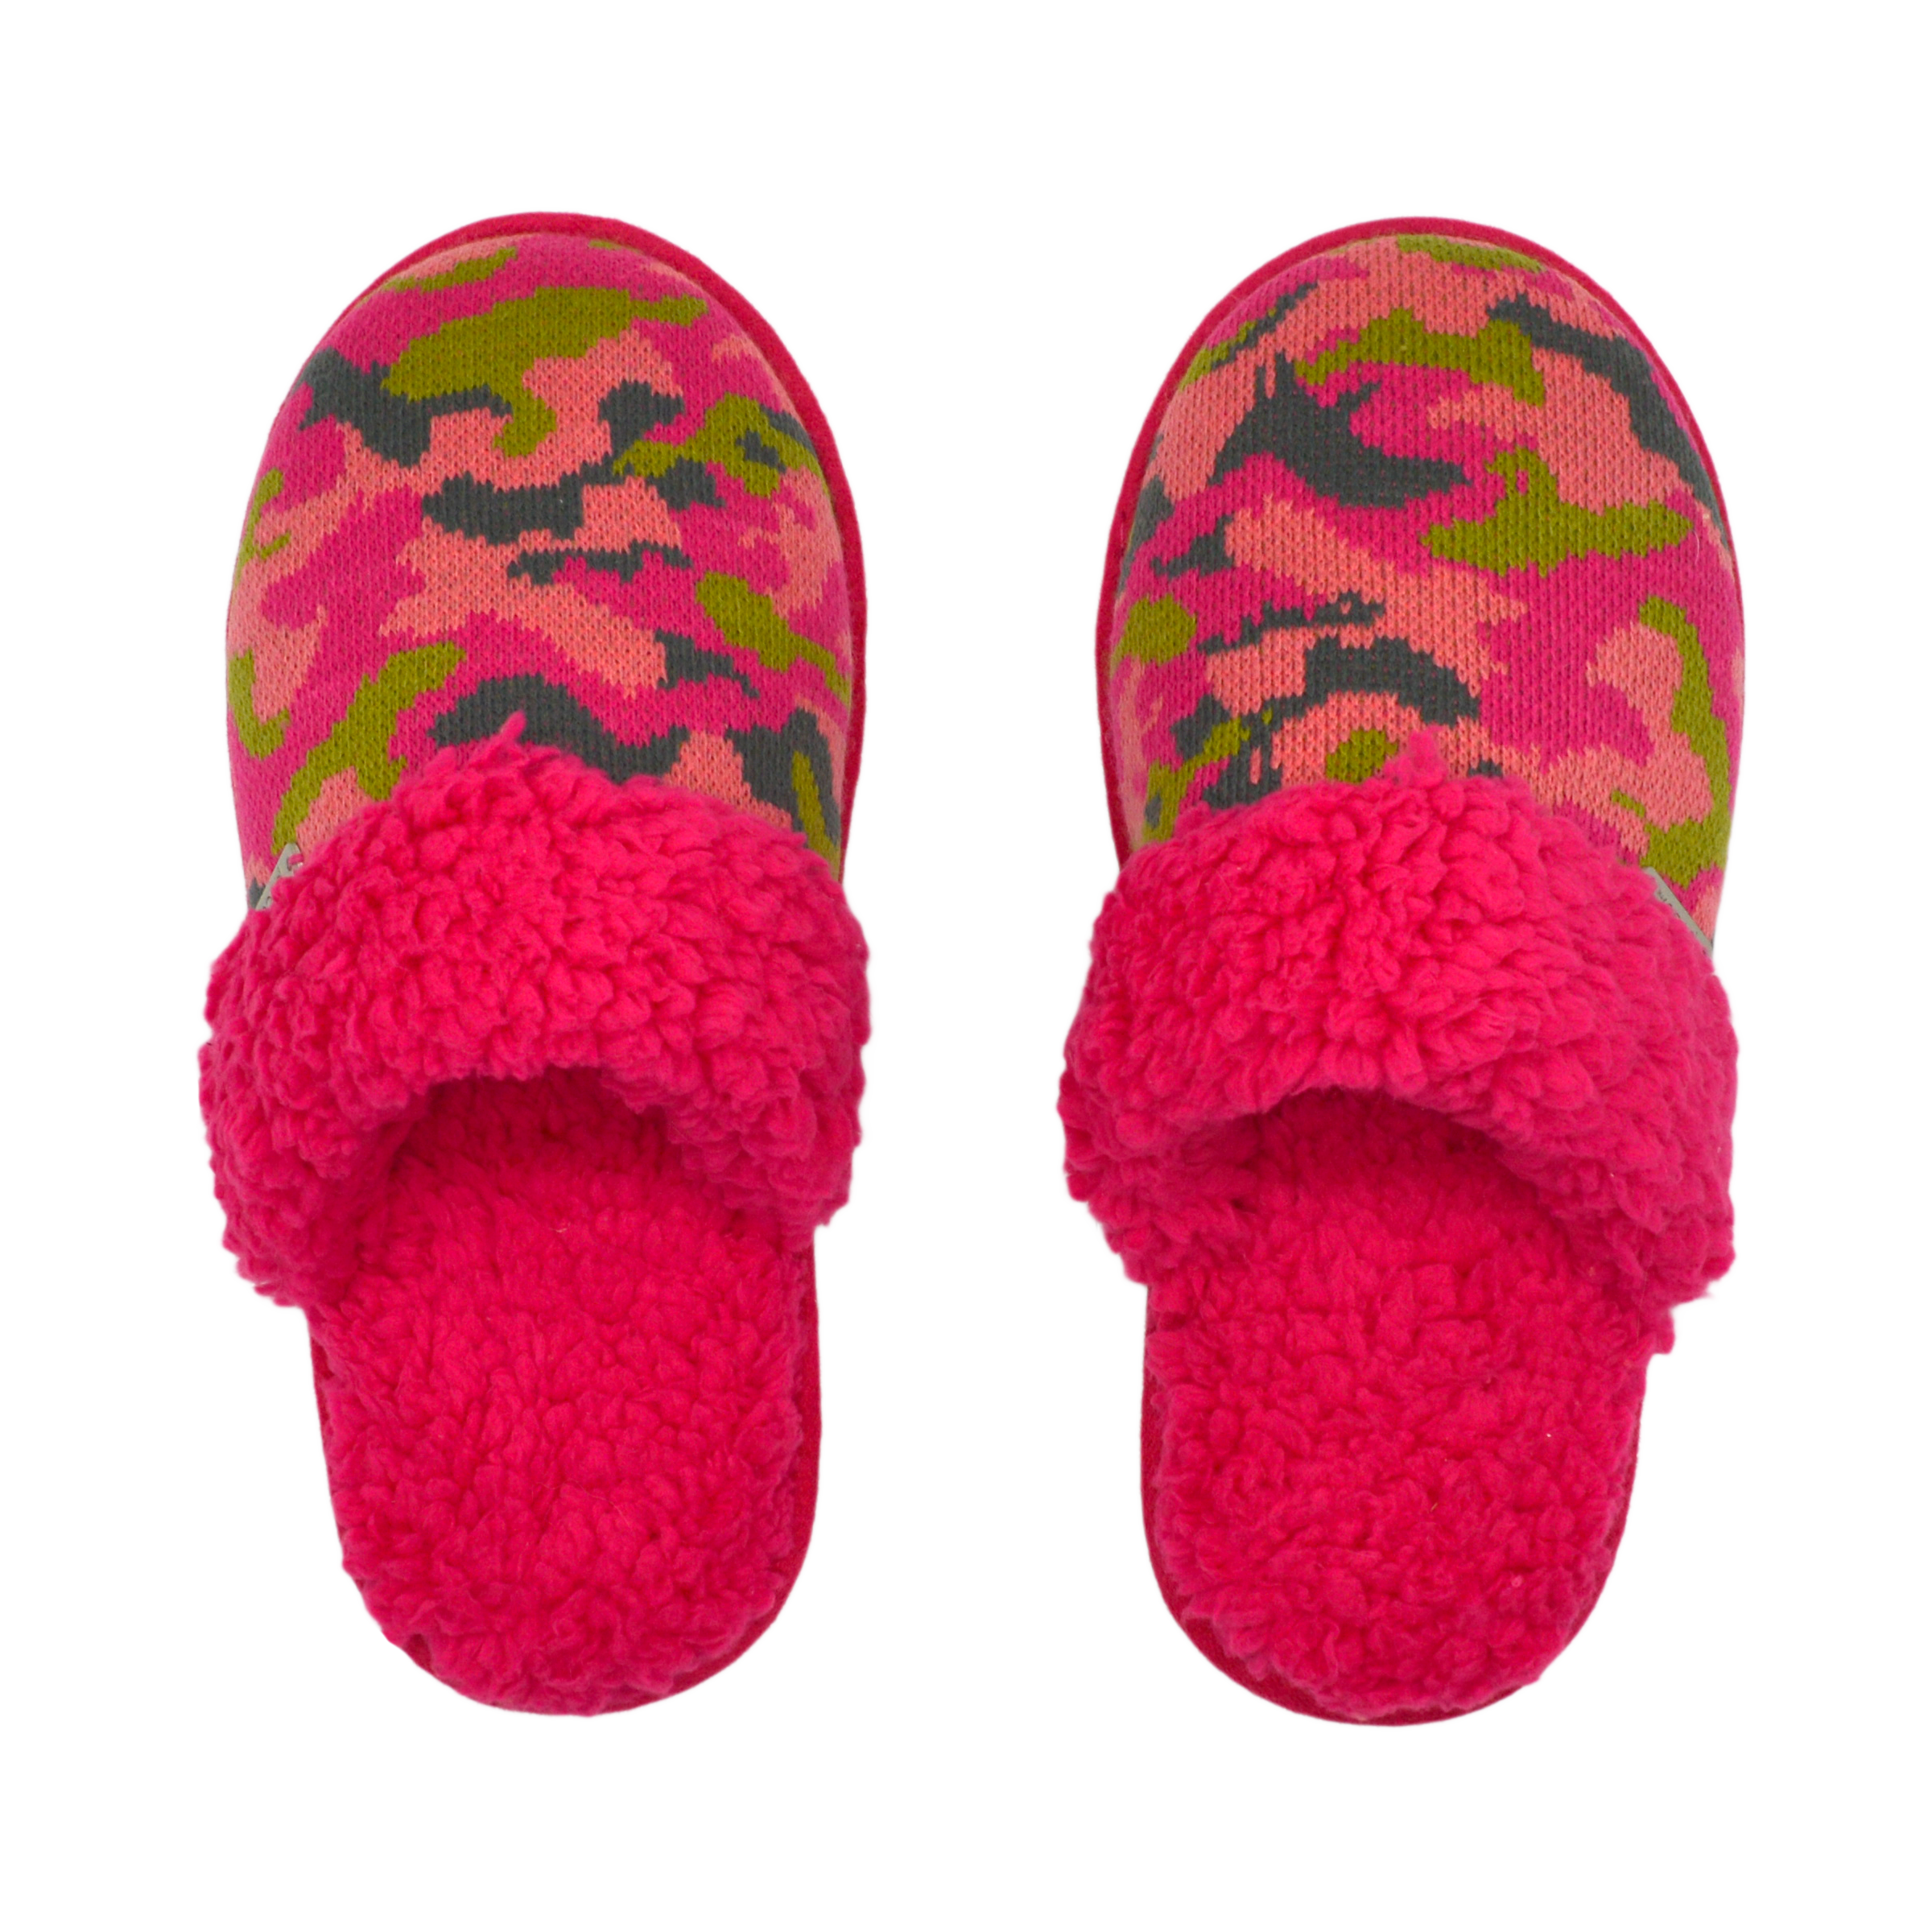 pink camo slippers